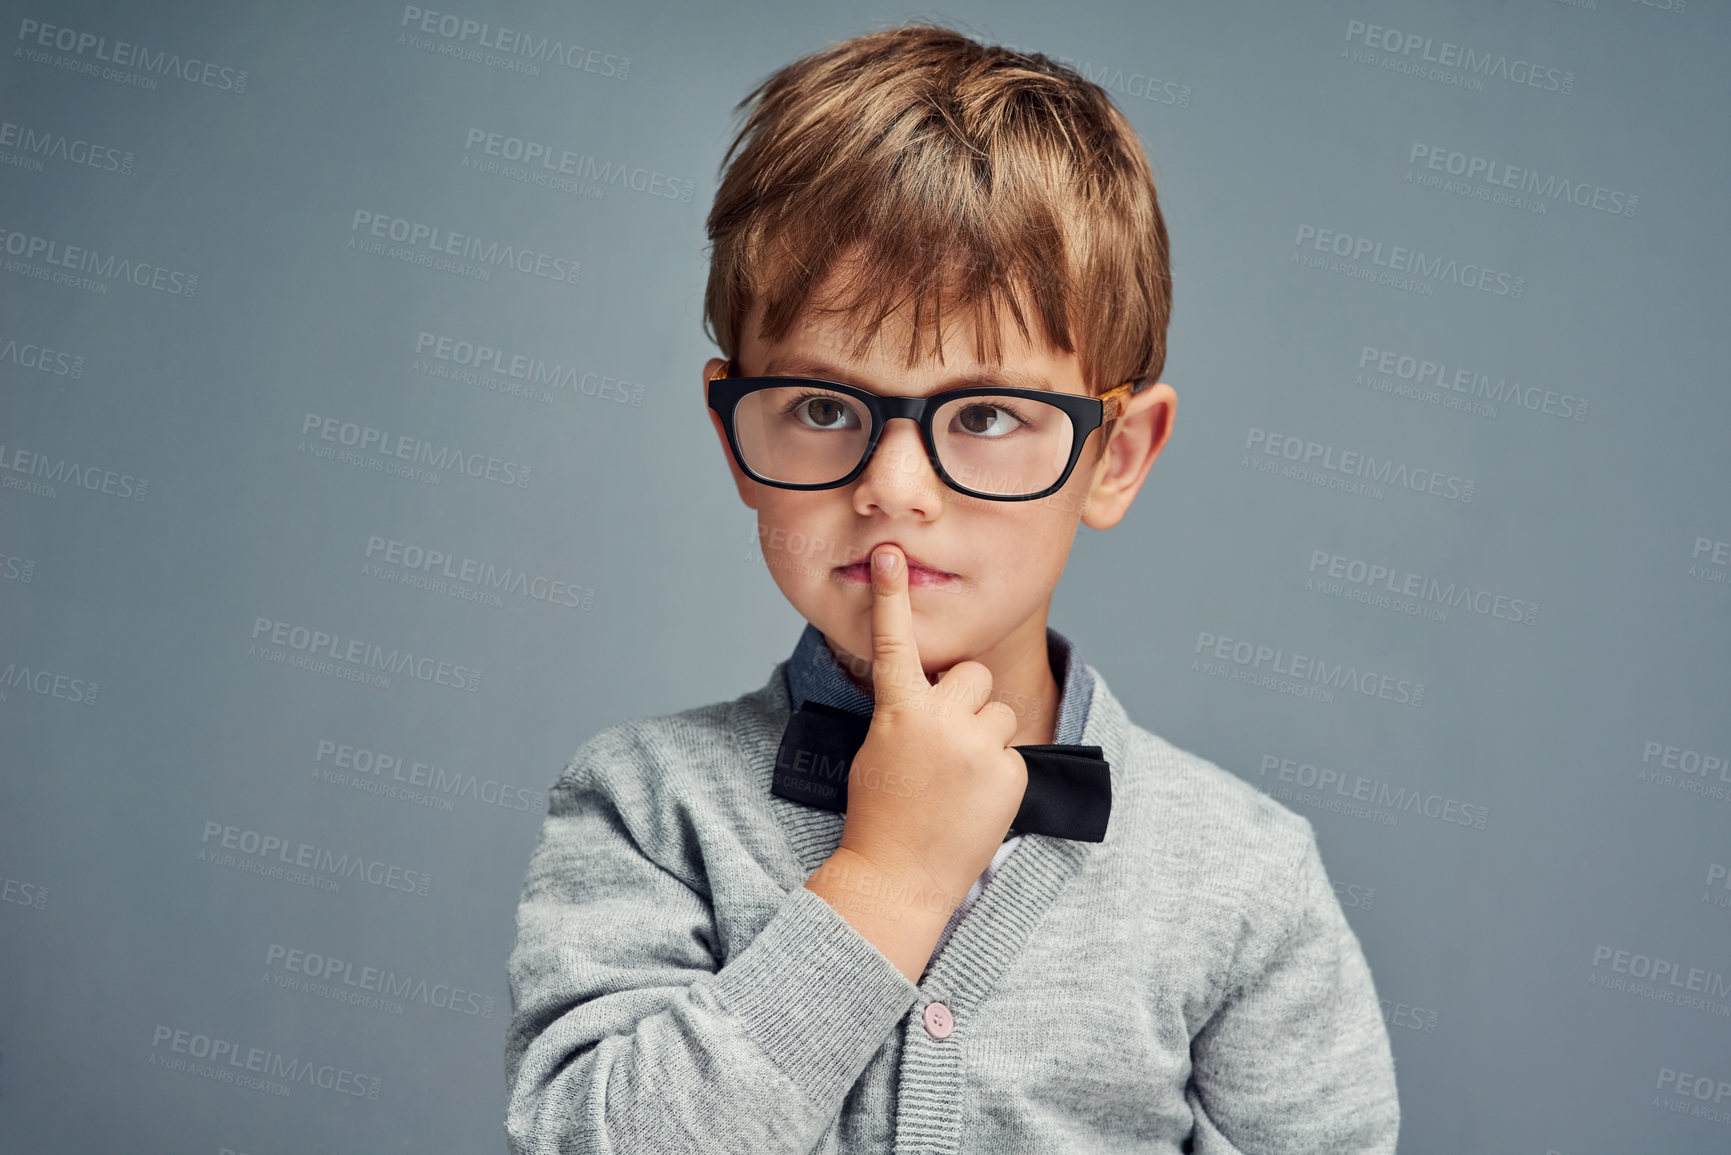 Buy stock photo Studio shot of a smartly dressed little boy looking thoughtful against a gray background